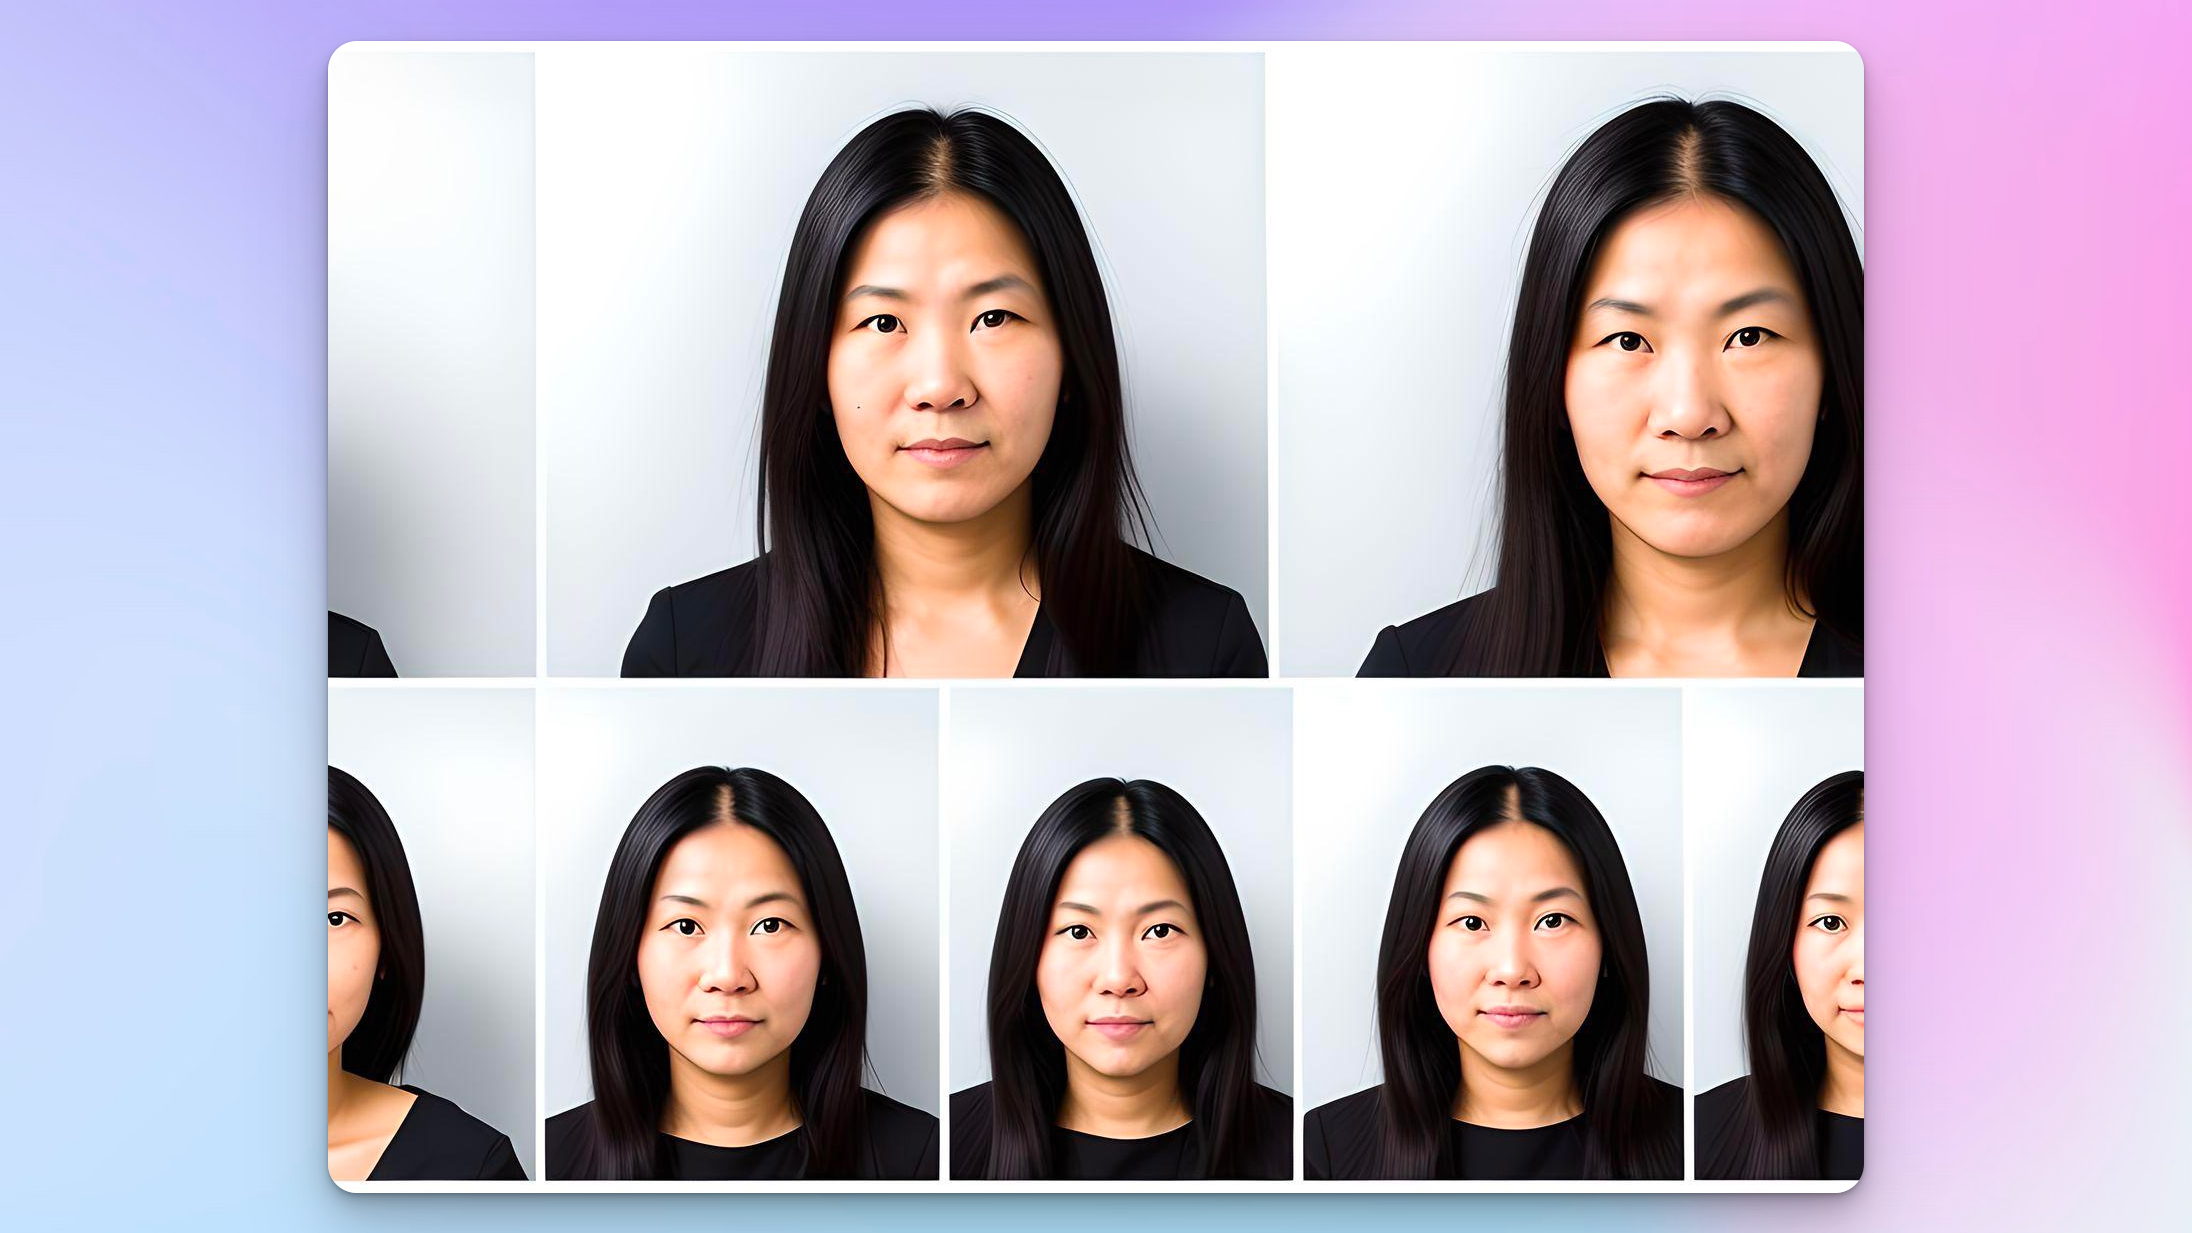 How to get Passport Photos at Home?